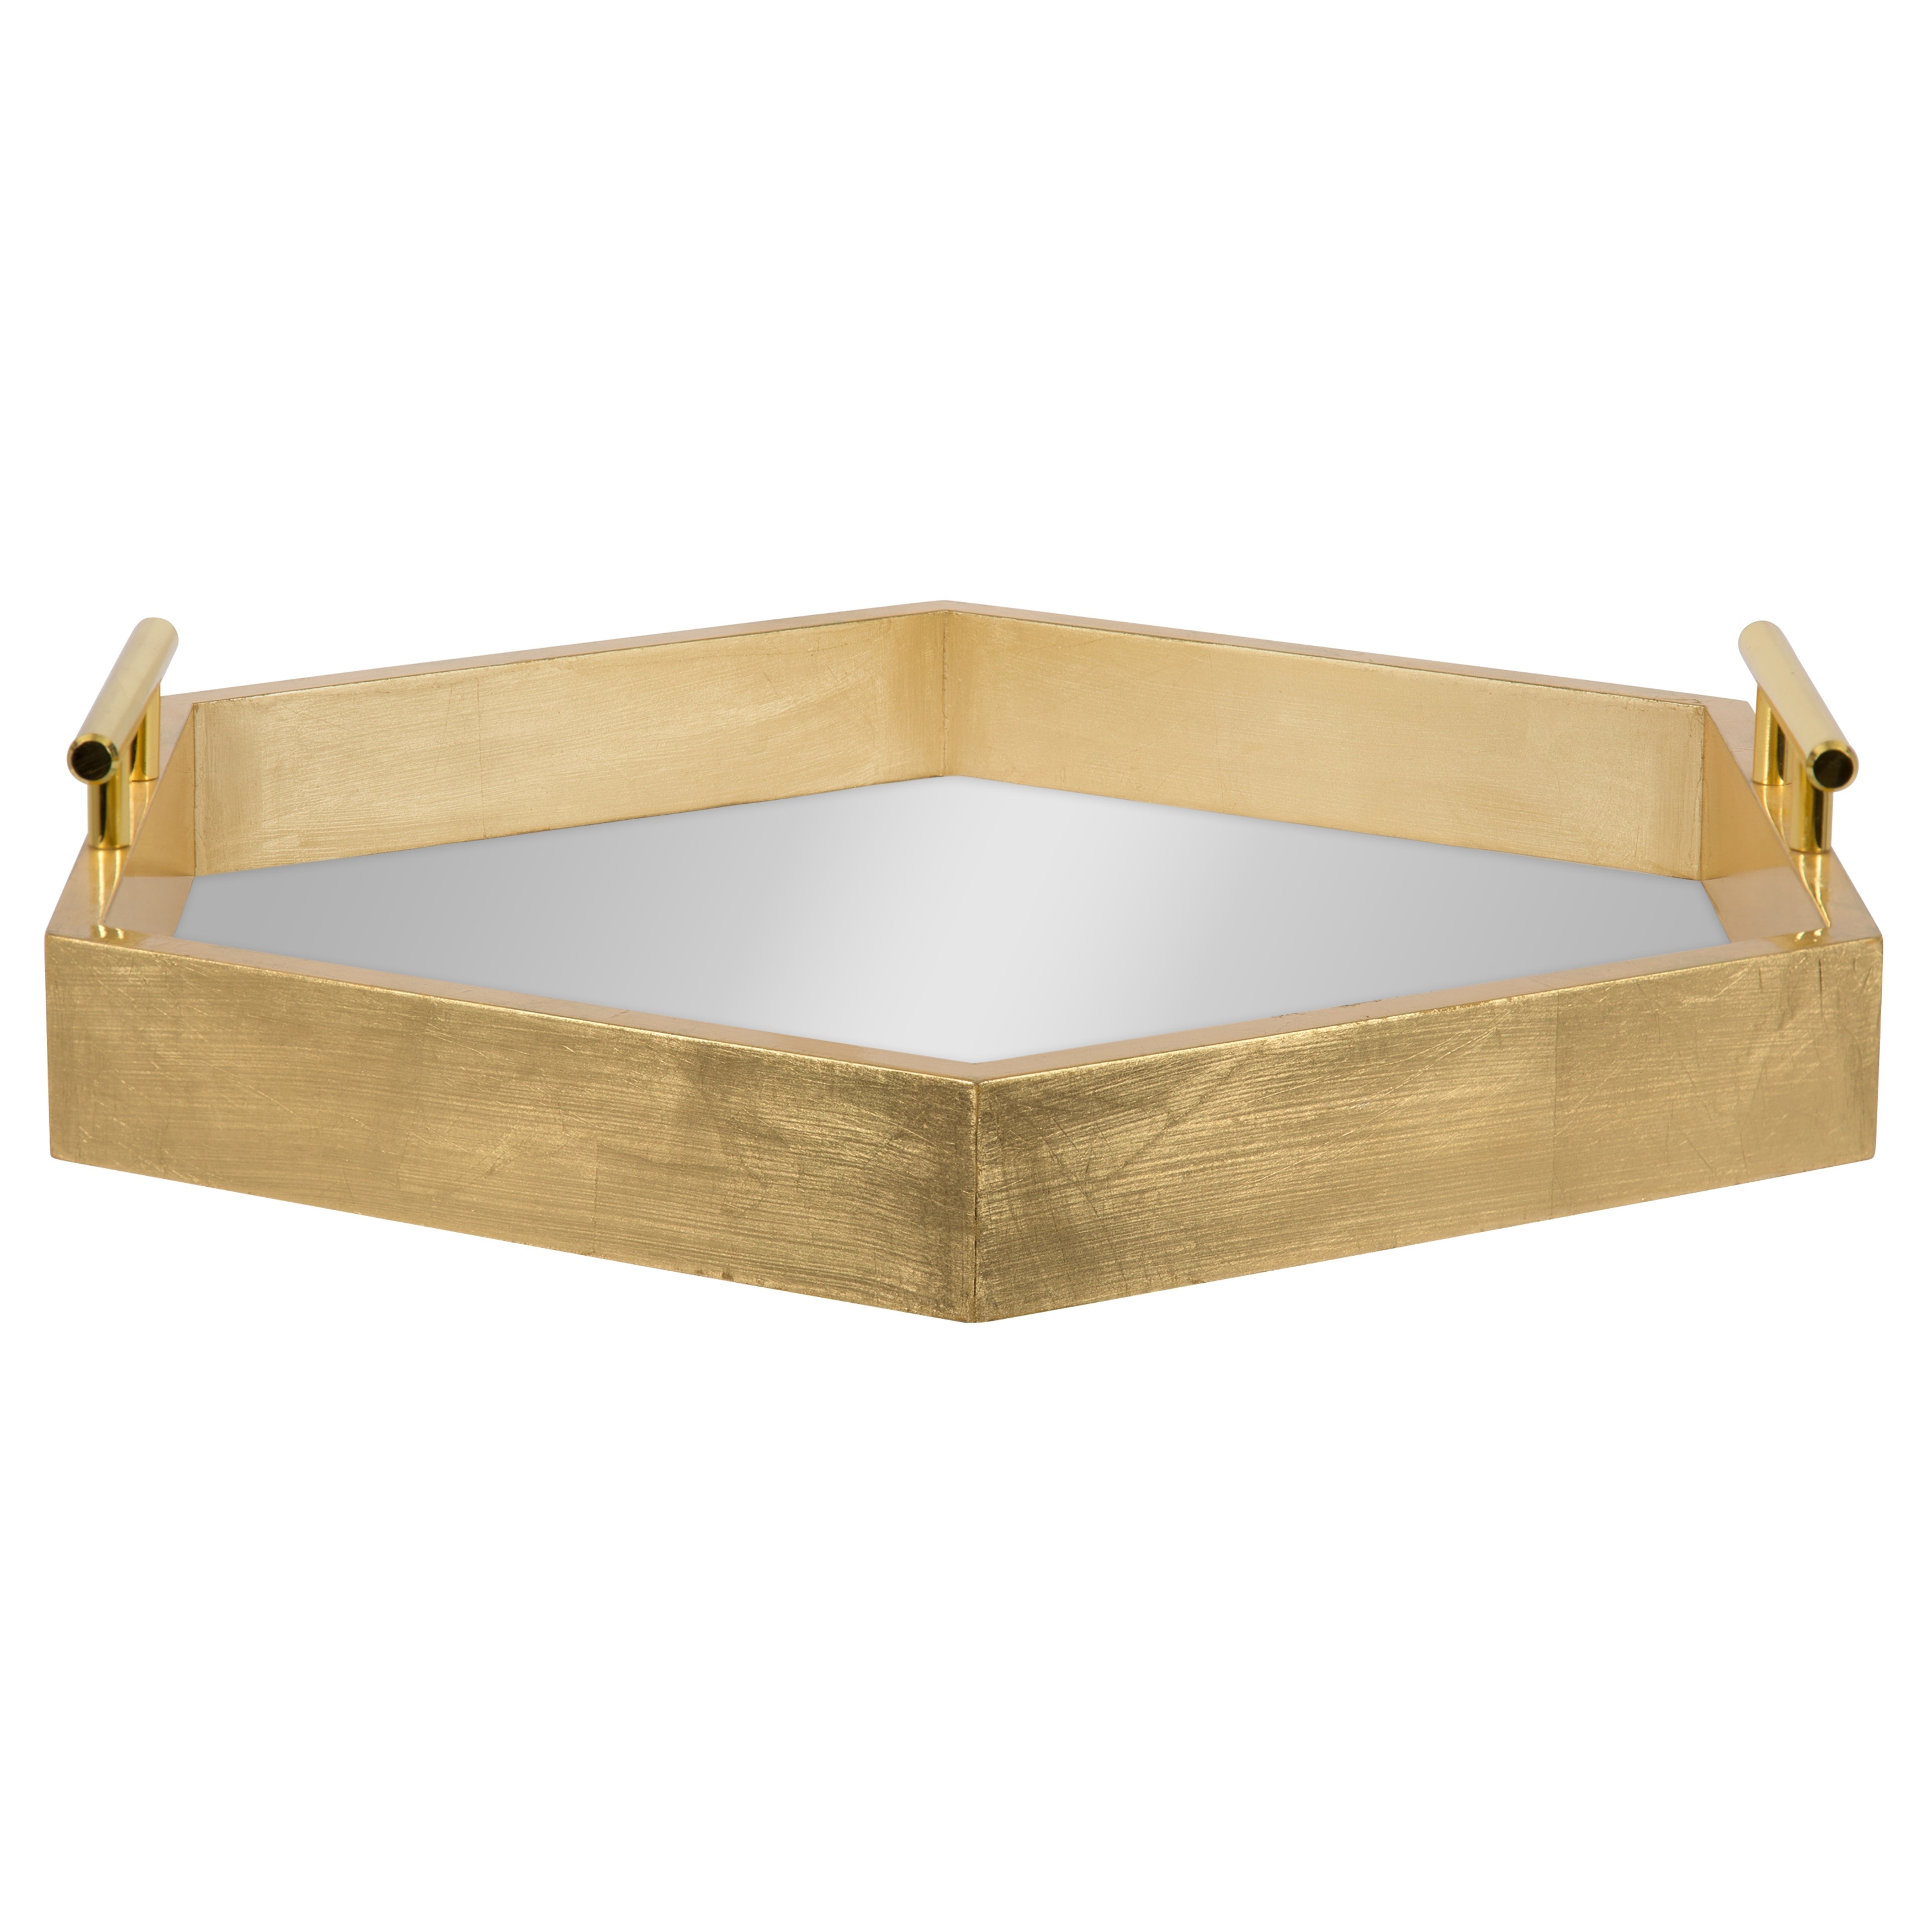 White and Gold Kate and Laurel Lipton Hexagon Decorative Tray with Polished Metal Handles